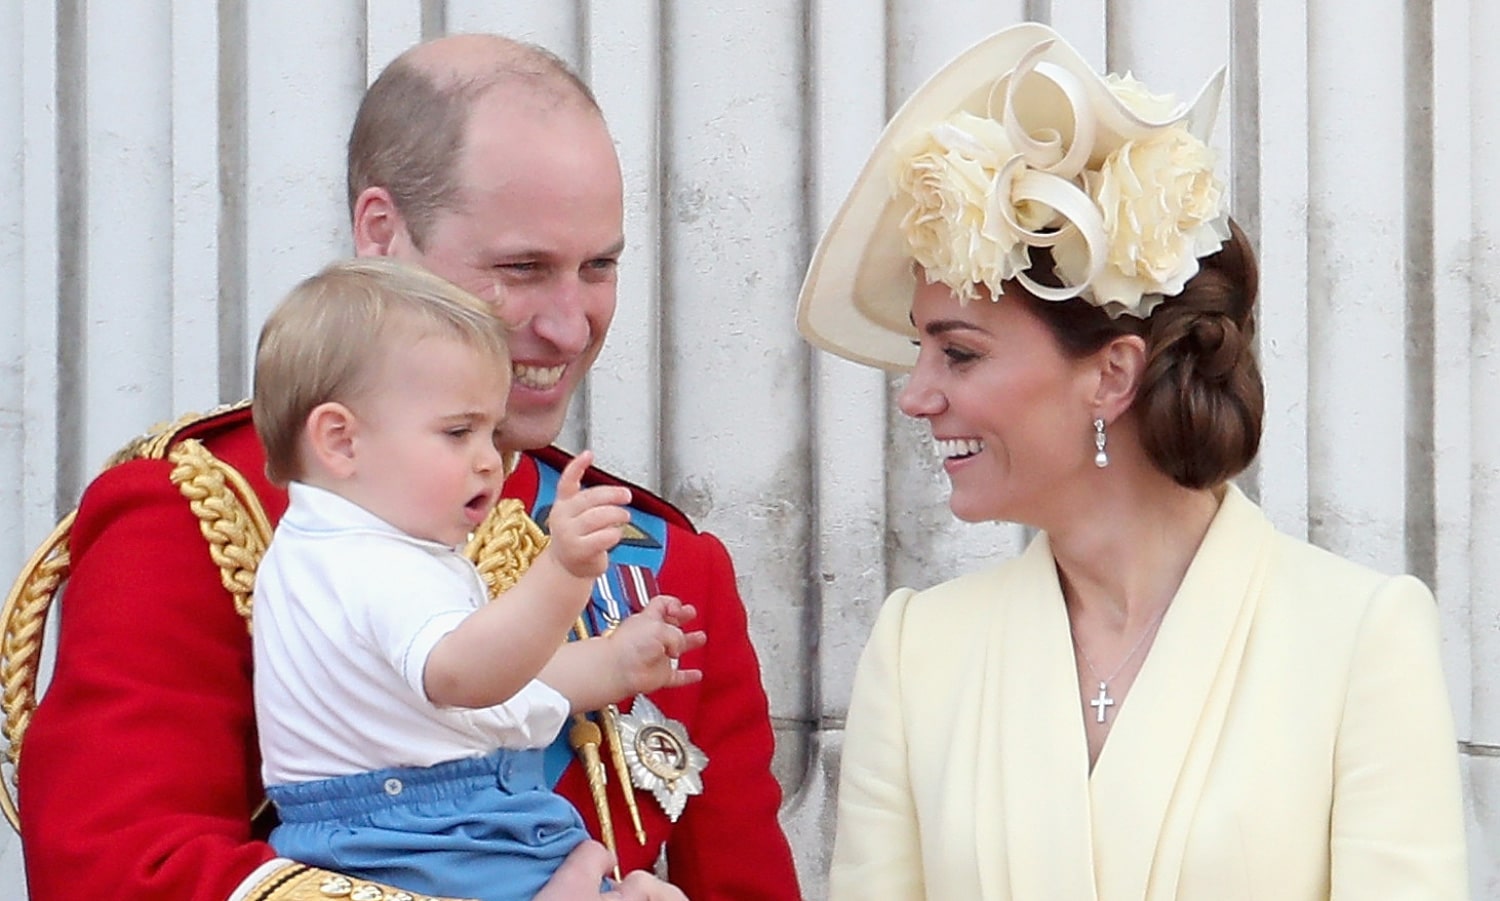 Why Prince William's Youngest Son Almost Didn't Get A Royal Title